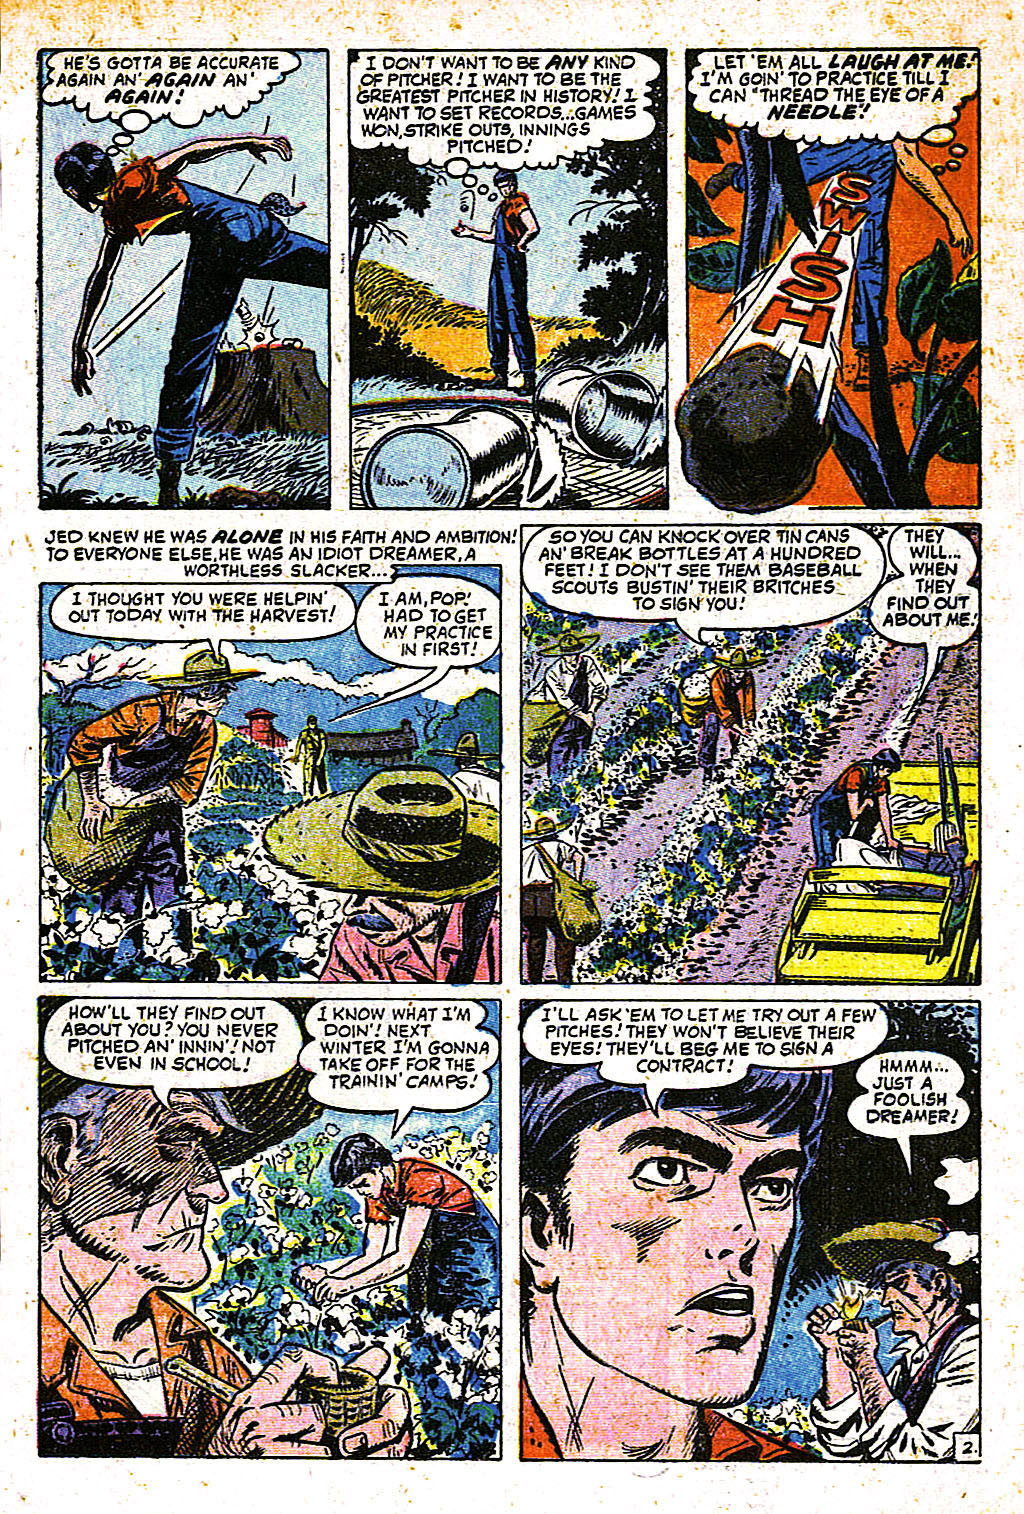 Marvel Tales (1949) 131 Page 16